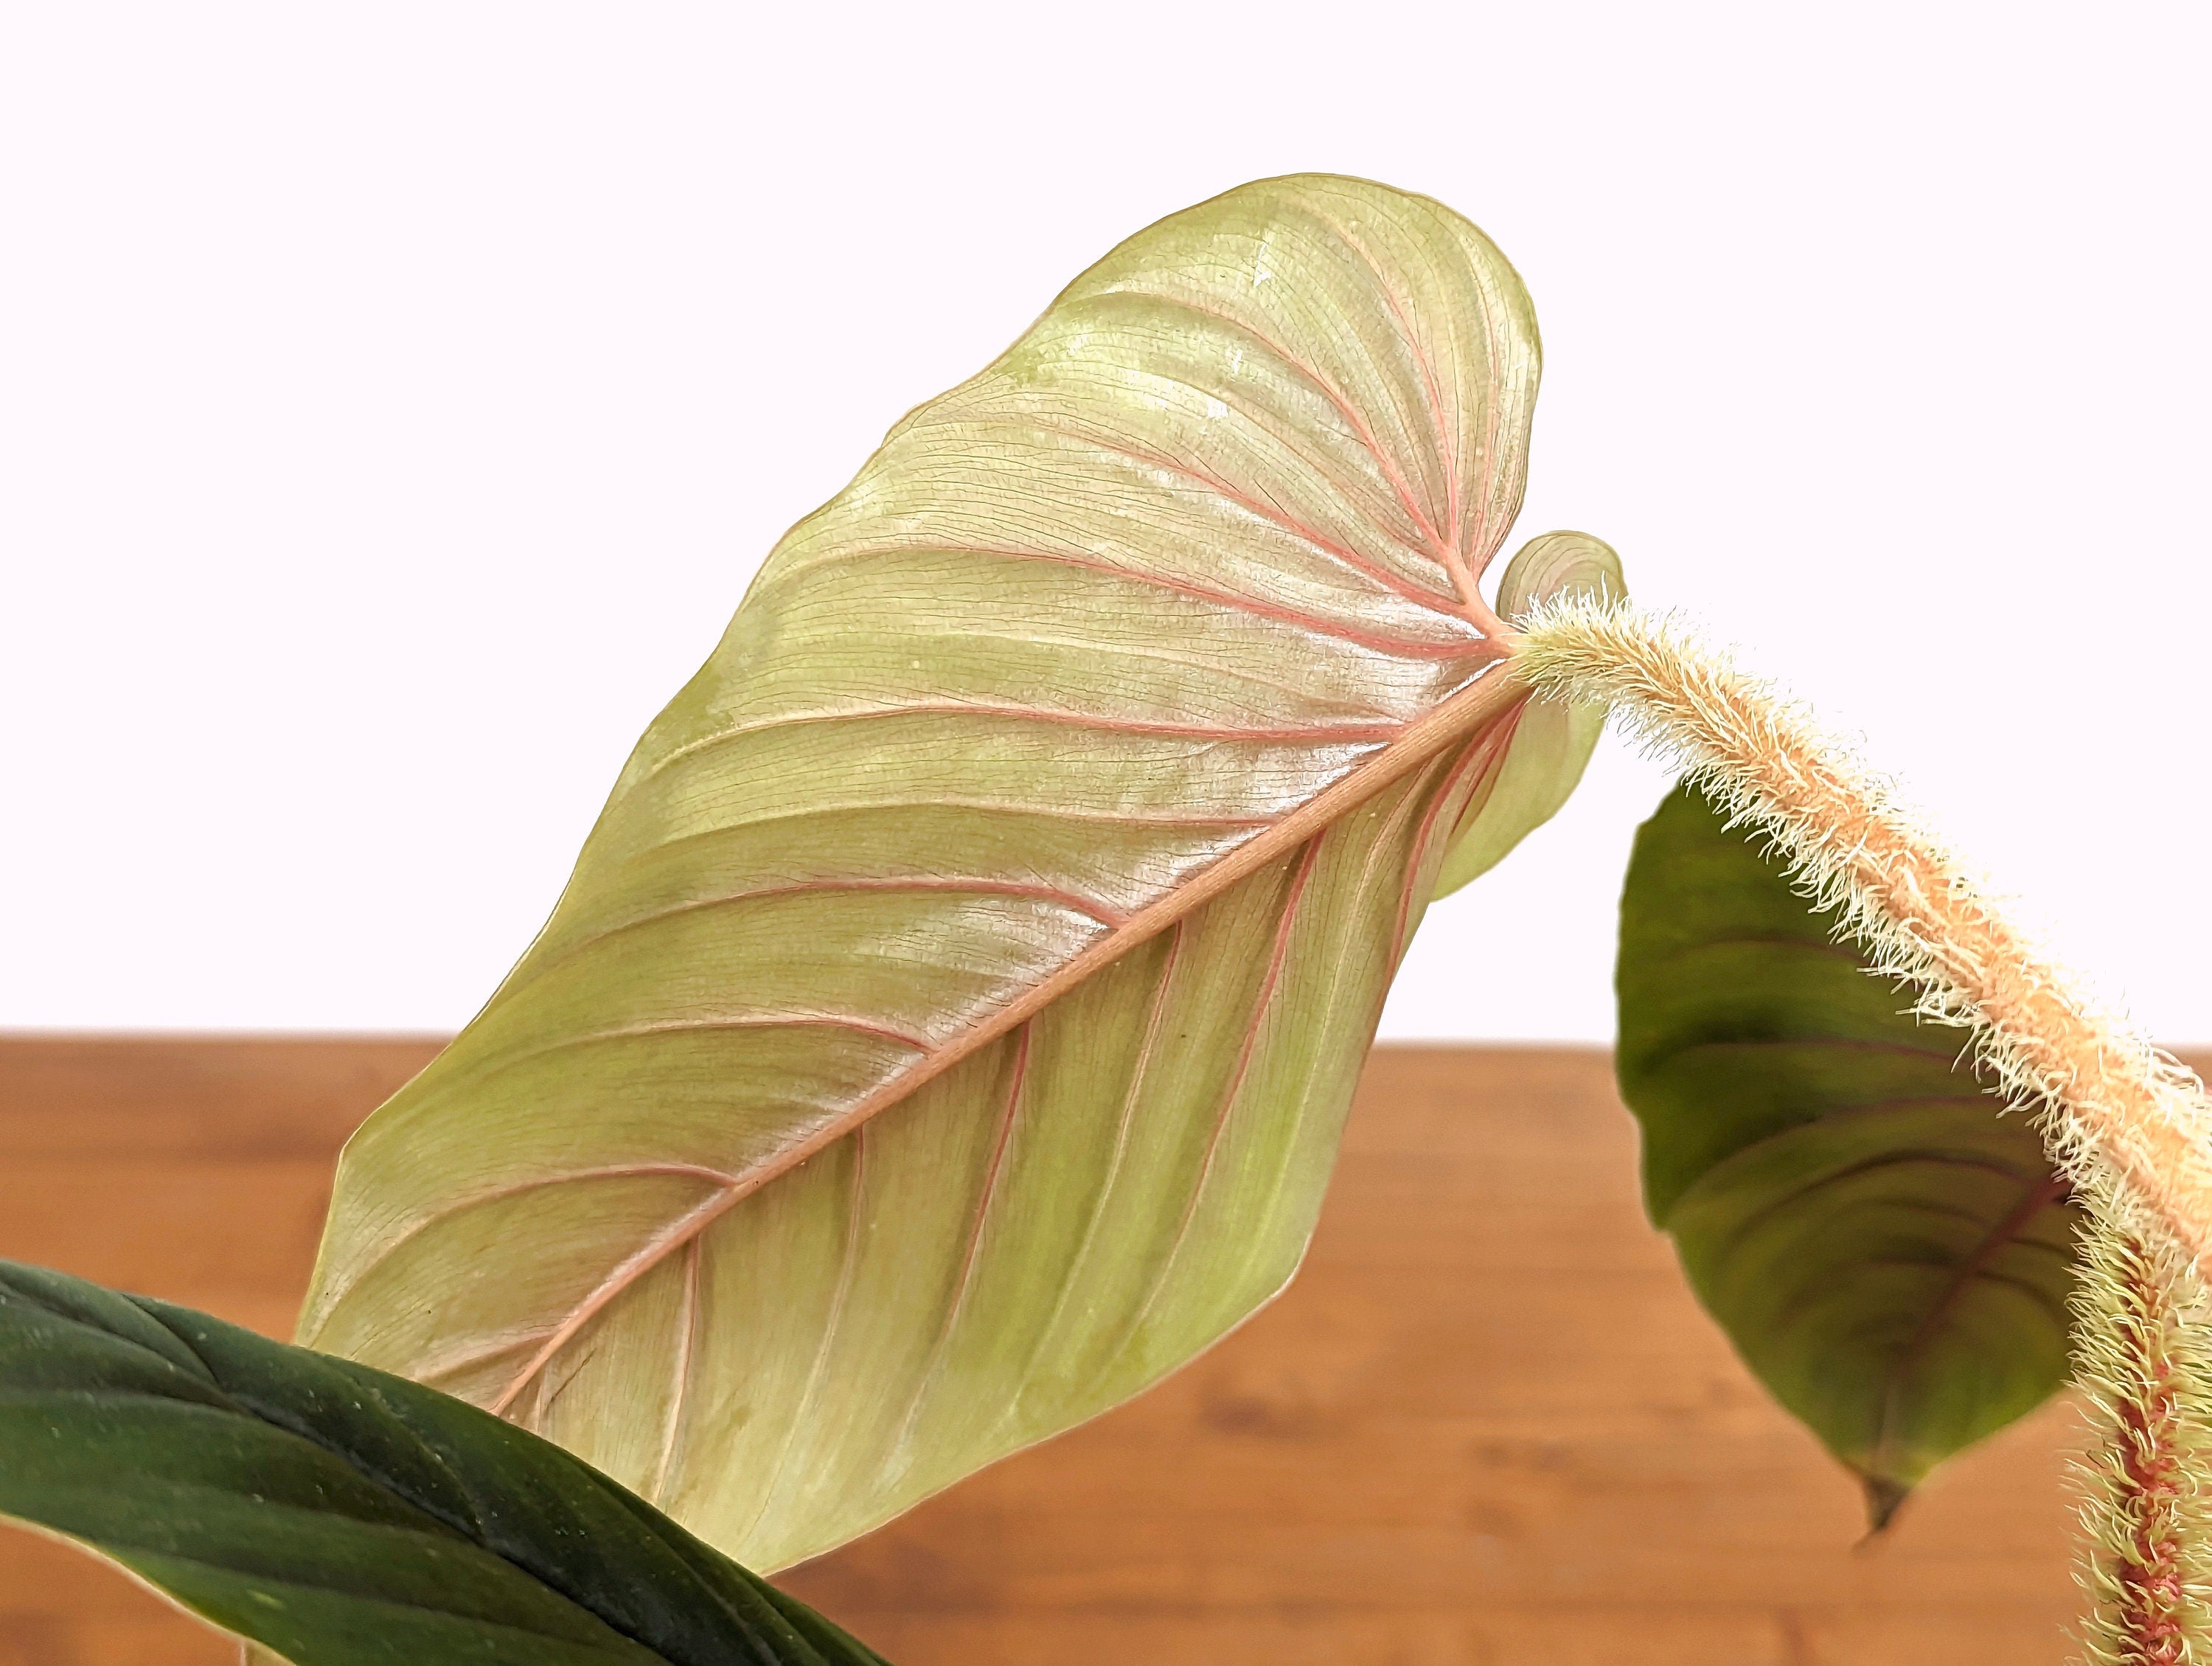 Philodendron serpens | 4 inch pot Live Rare Houseplant tropical